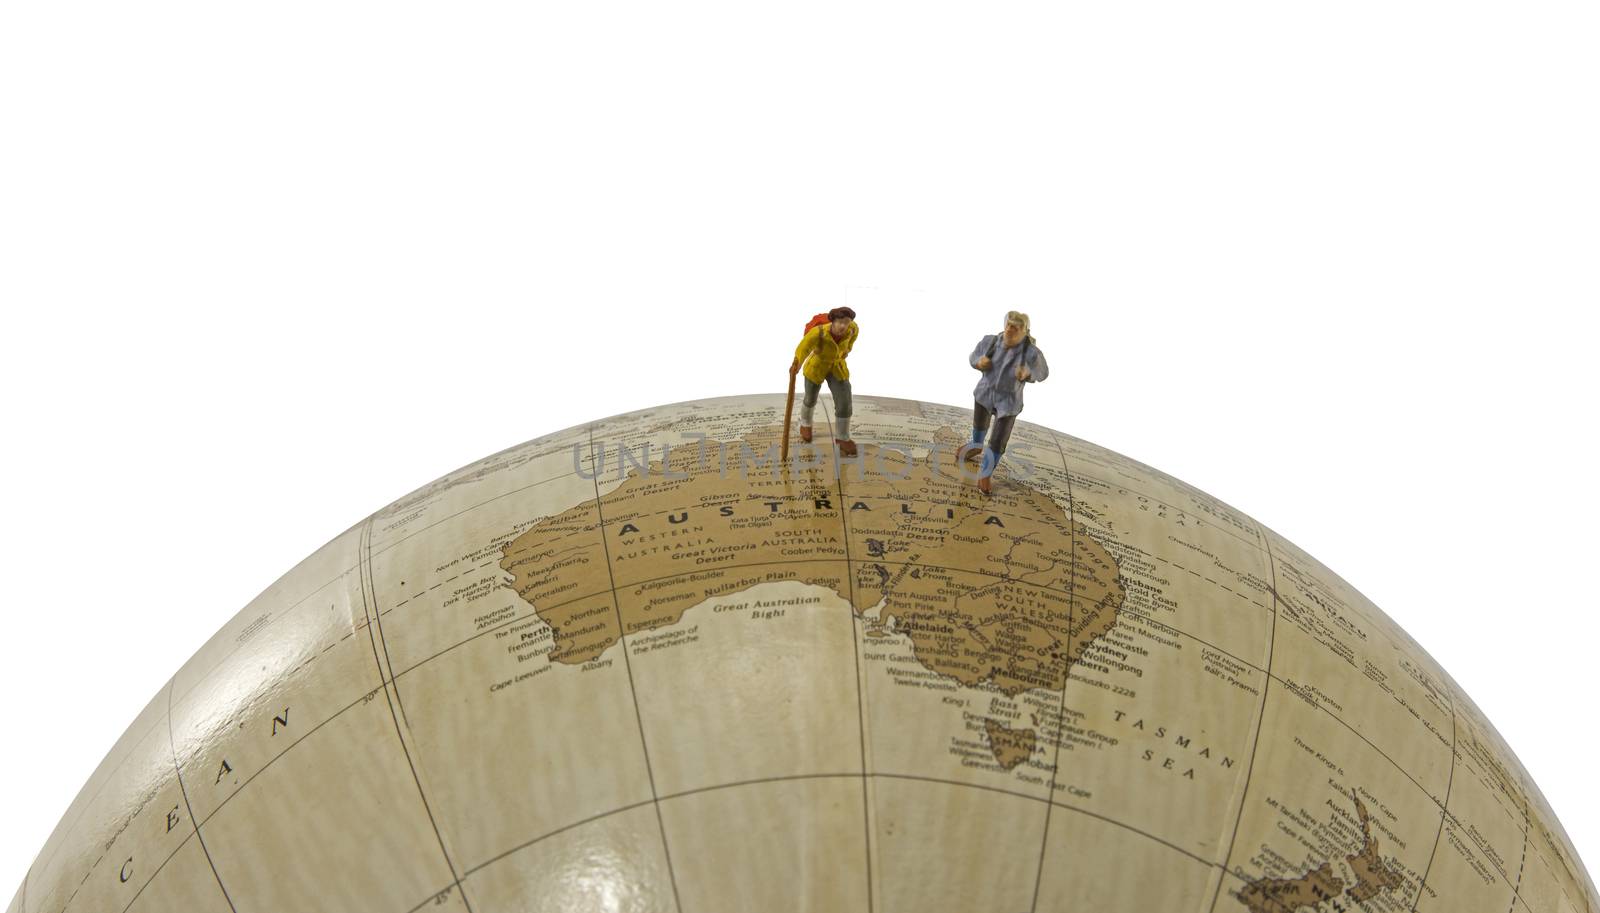 little figures backpaking australia as a big adventure with backpack and walking on a globe